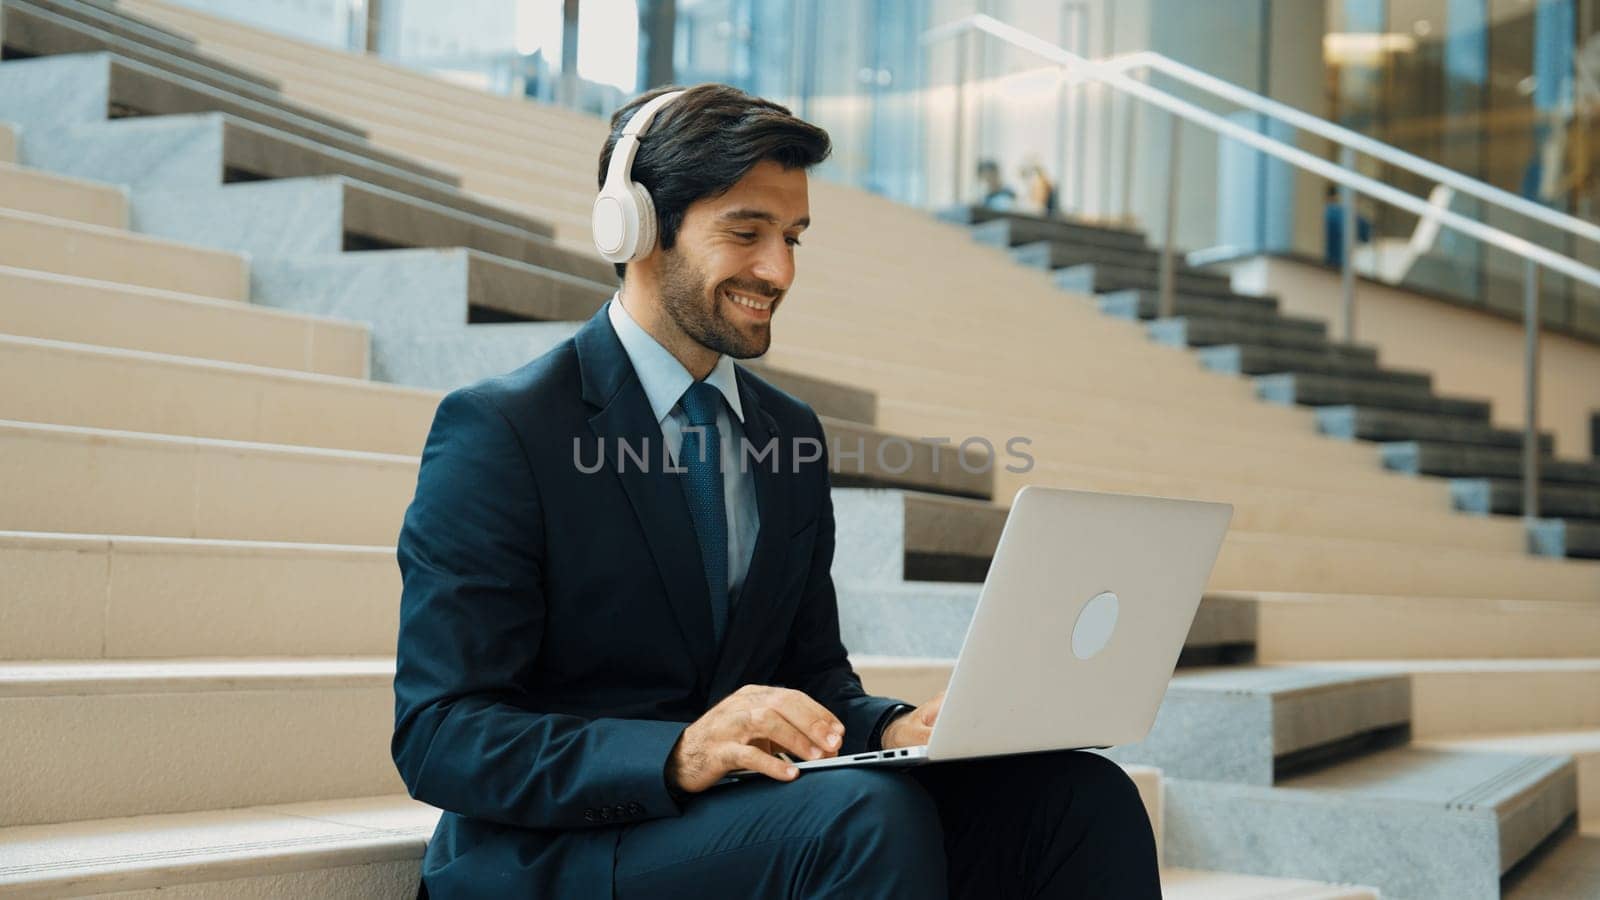 Professional business man sitting at stairs while working on laptop. Skilled project manager listening music from headphone and checking email and discussion about marketing plan. Outdoor. Exultant.